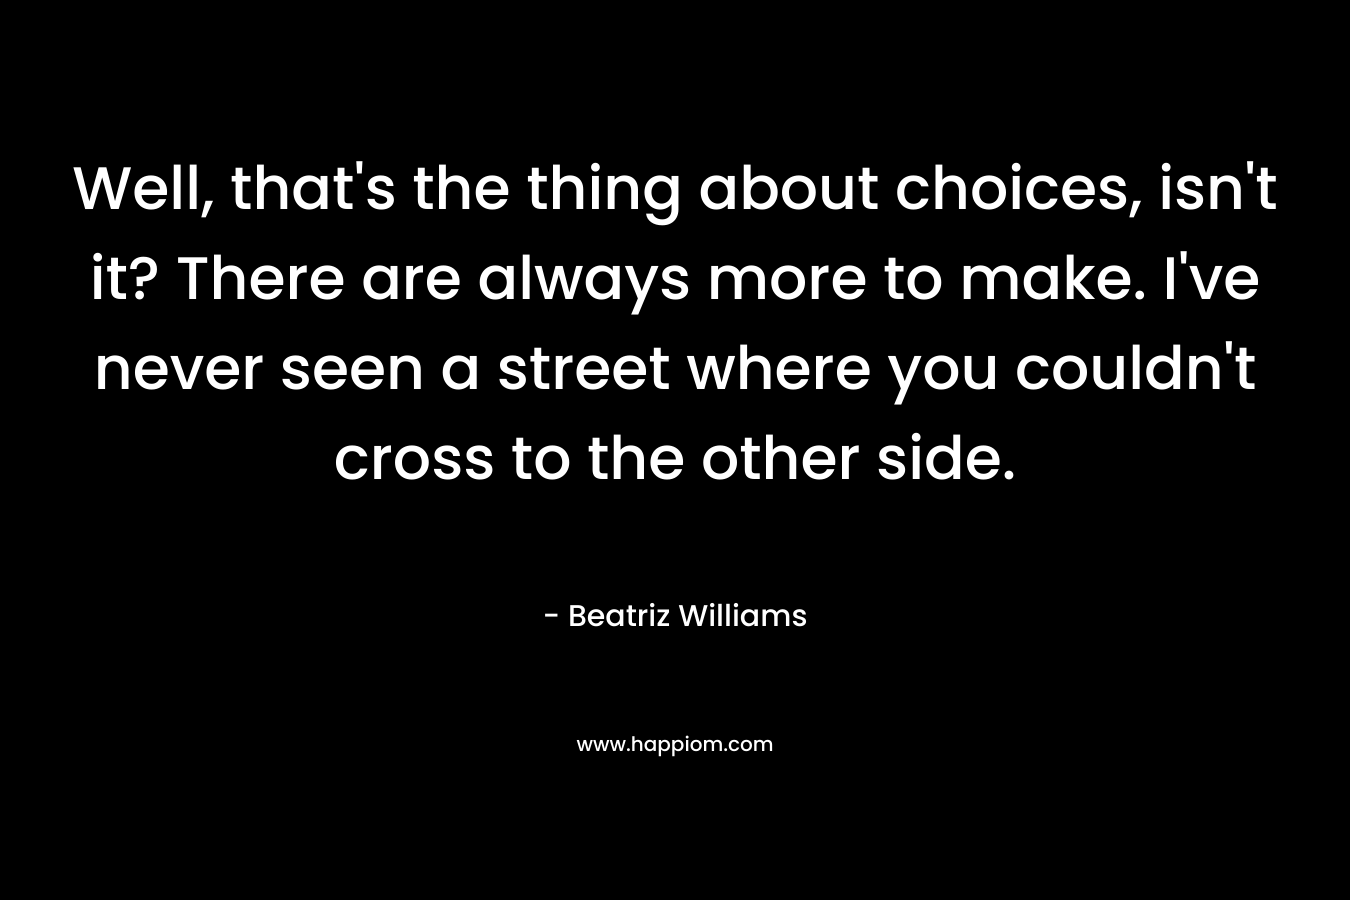 Well, that's the thing about choices, isn't it? There are always more to make. I've never seen a street where you couldn't cross to the other side.